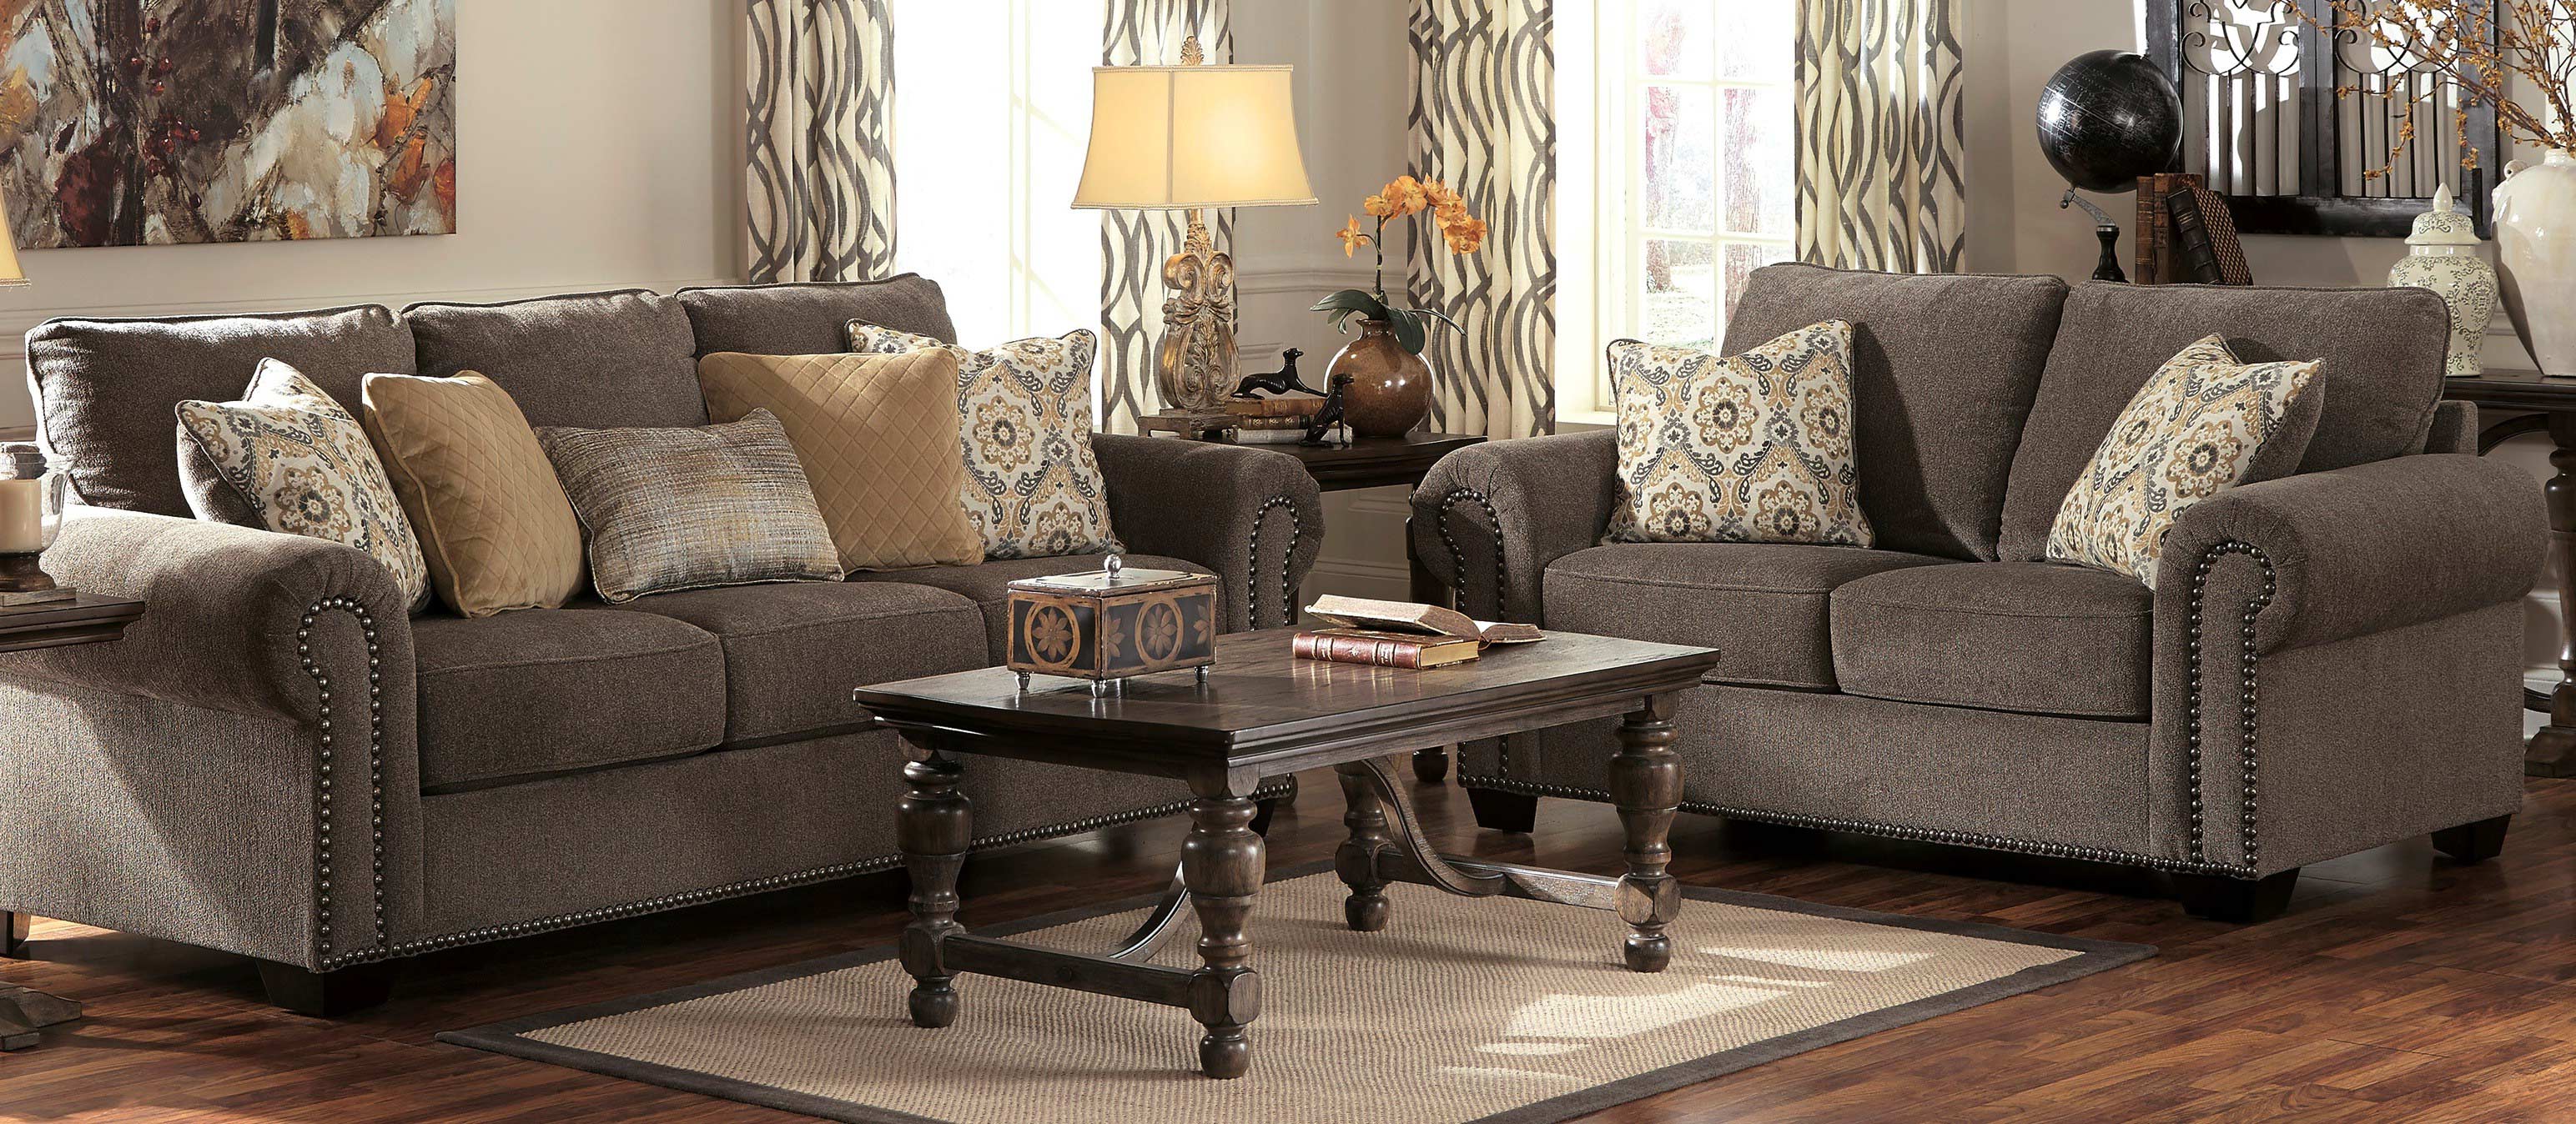 Living Room Furniture From Rooms To Go